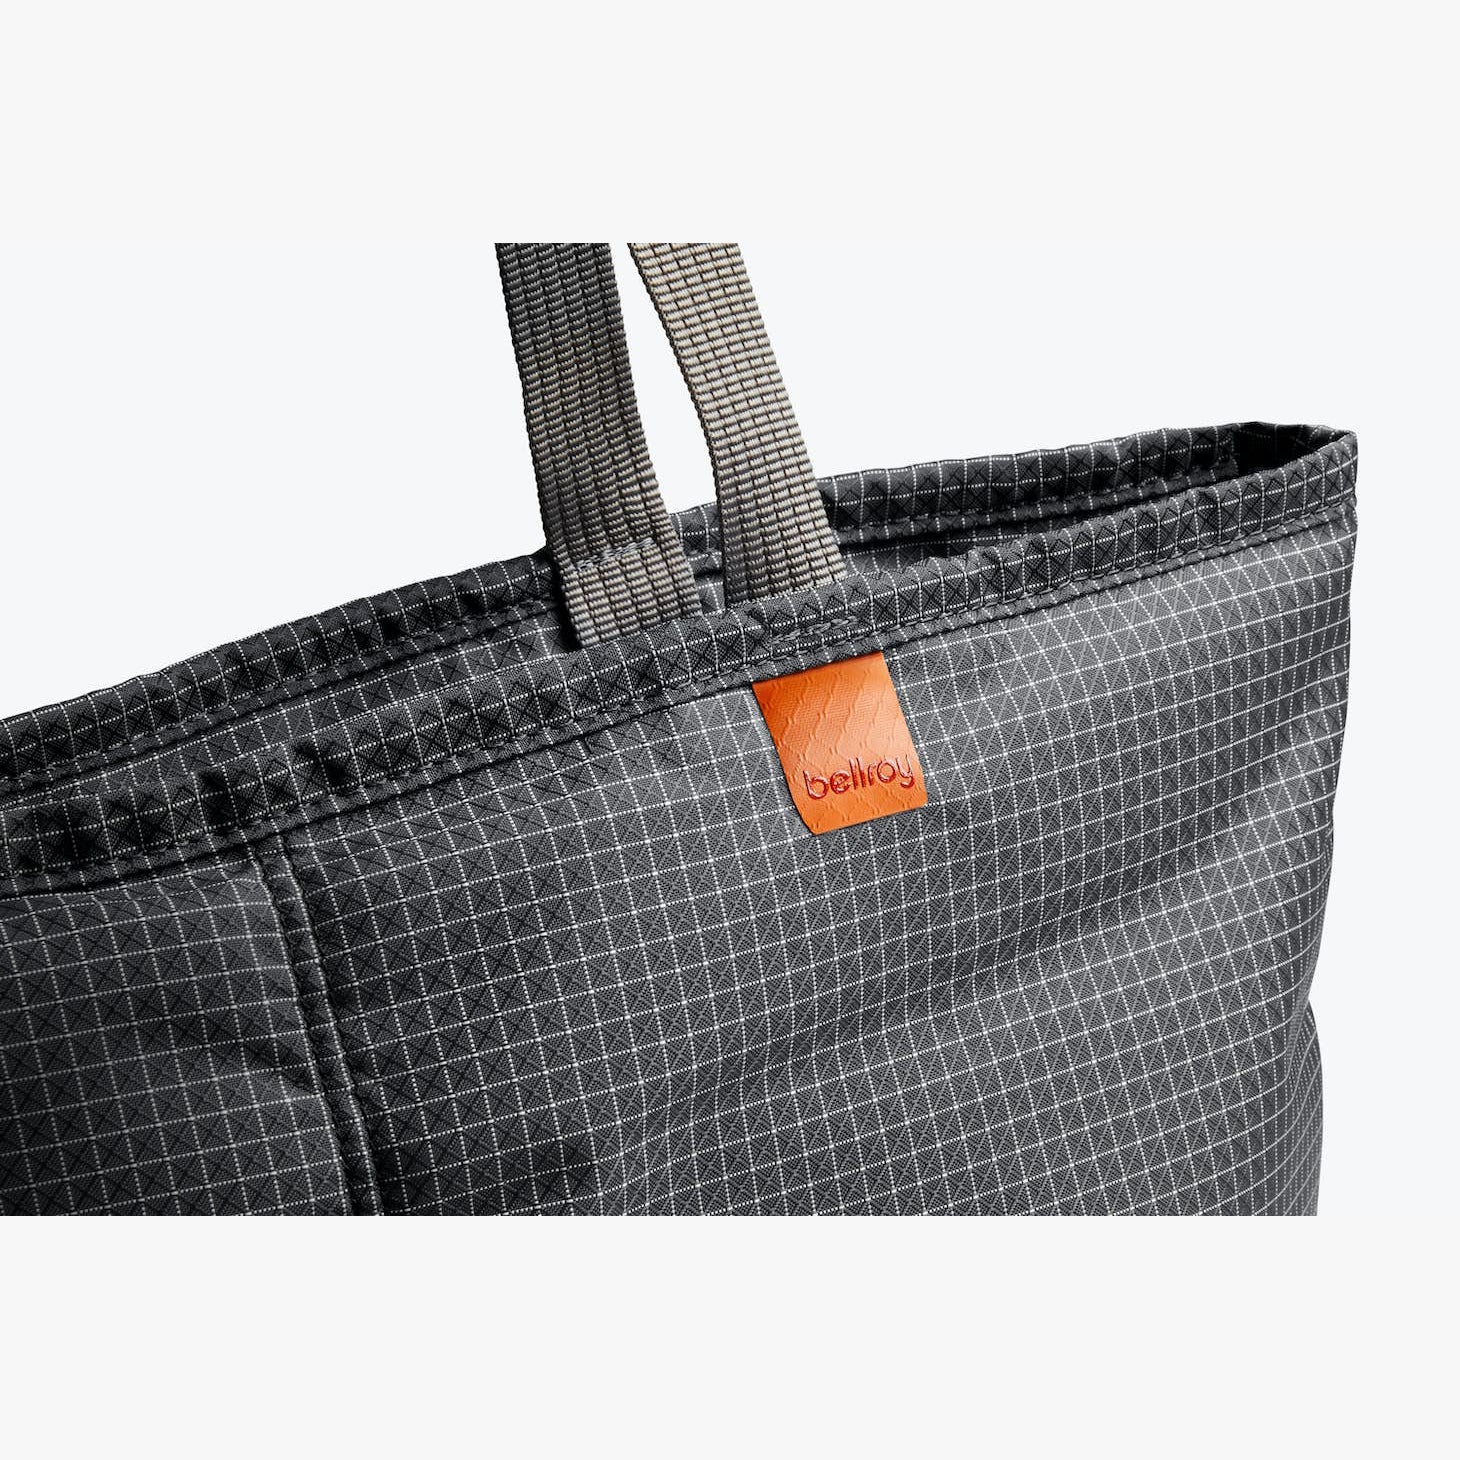 Bellroy Cooler Tote | 3M Thinsulate Insulated Tote Bag